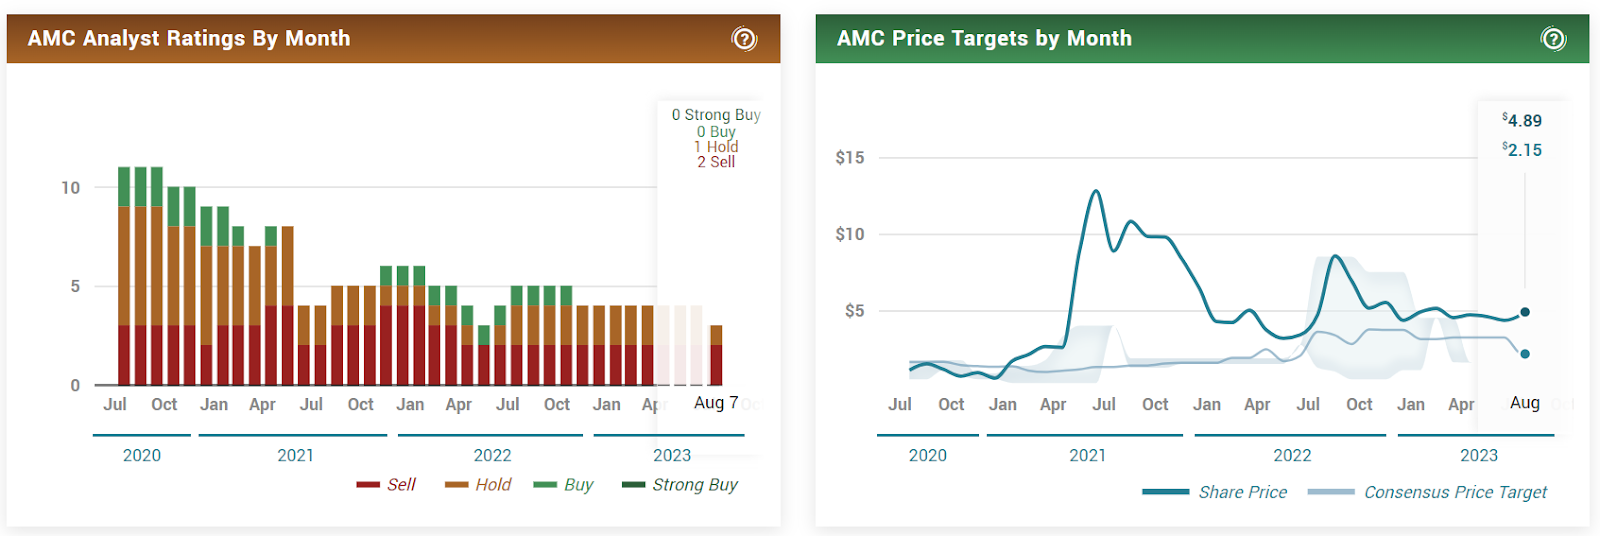 AMC Stock Conversion Could Negatively Affect August 8 Earnings